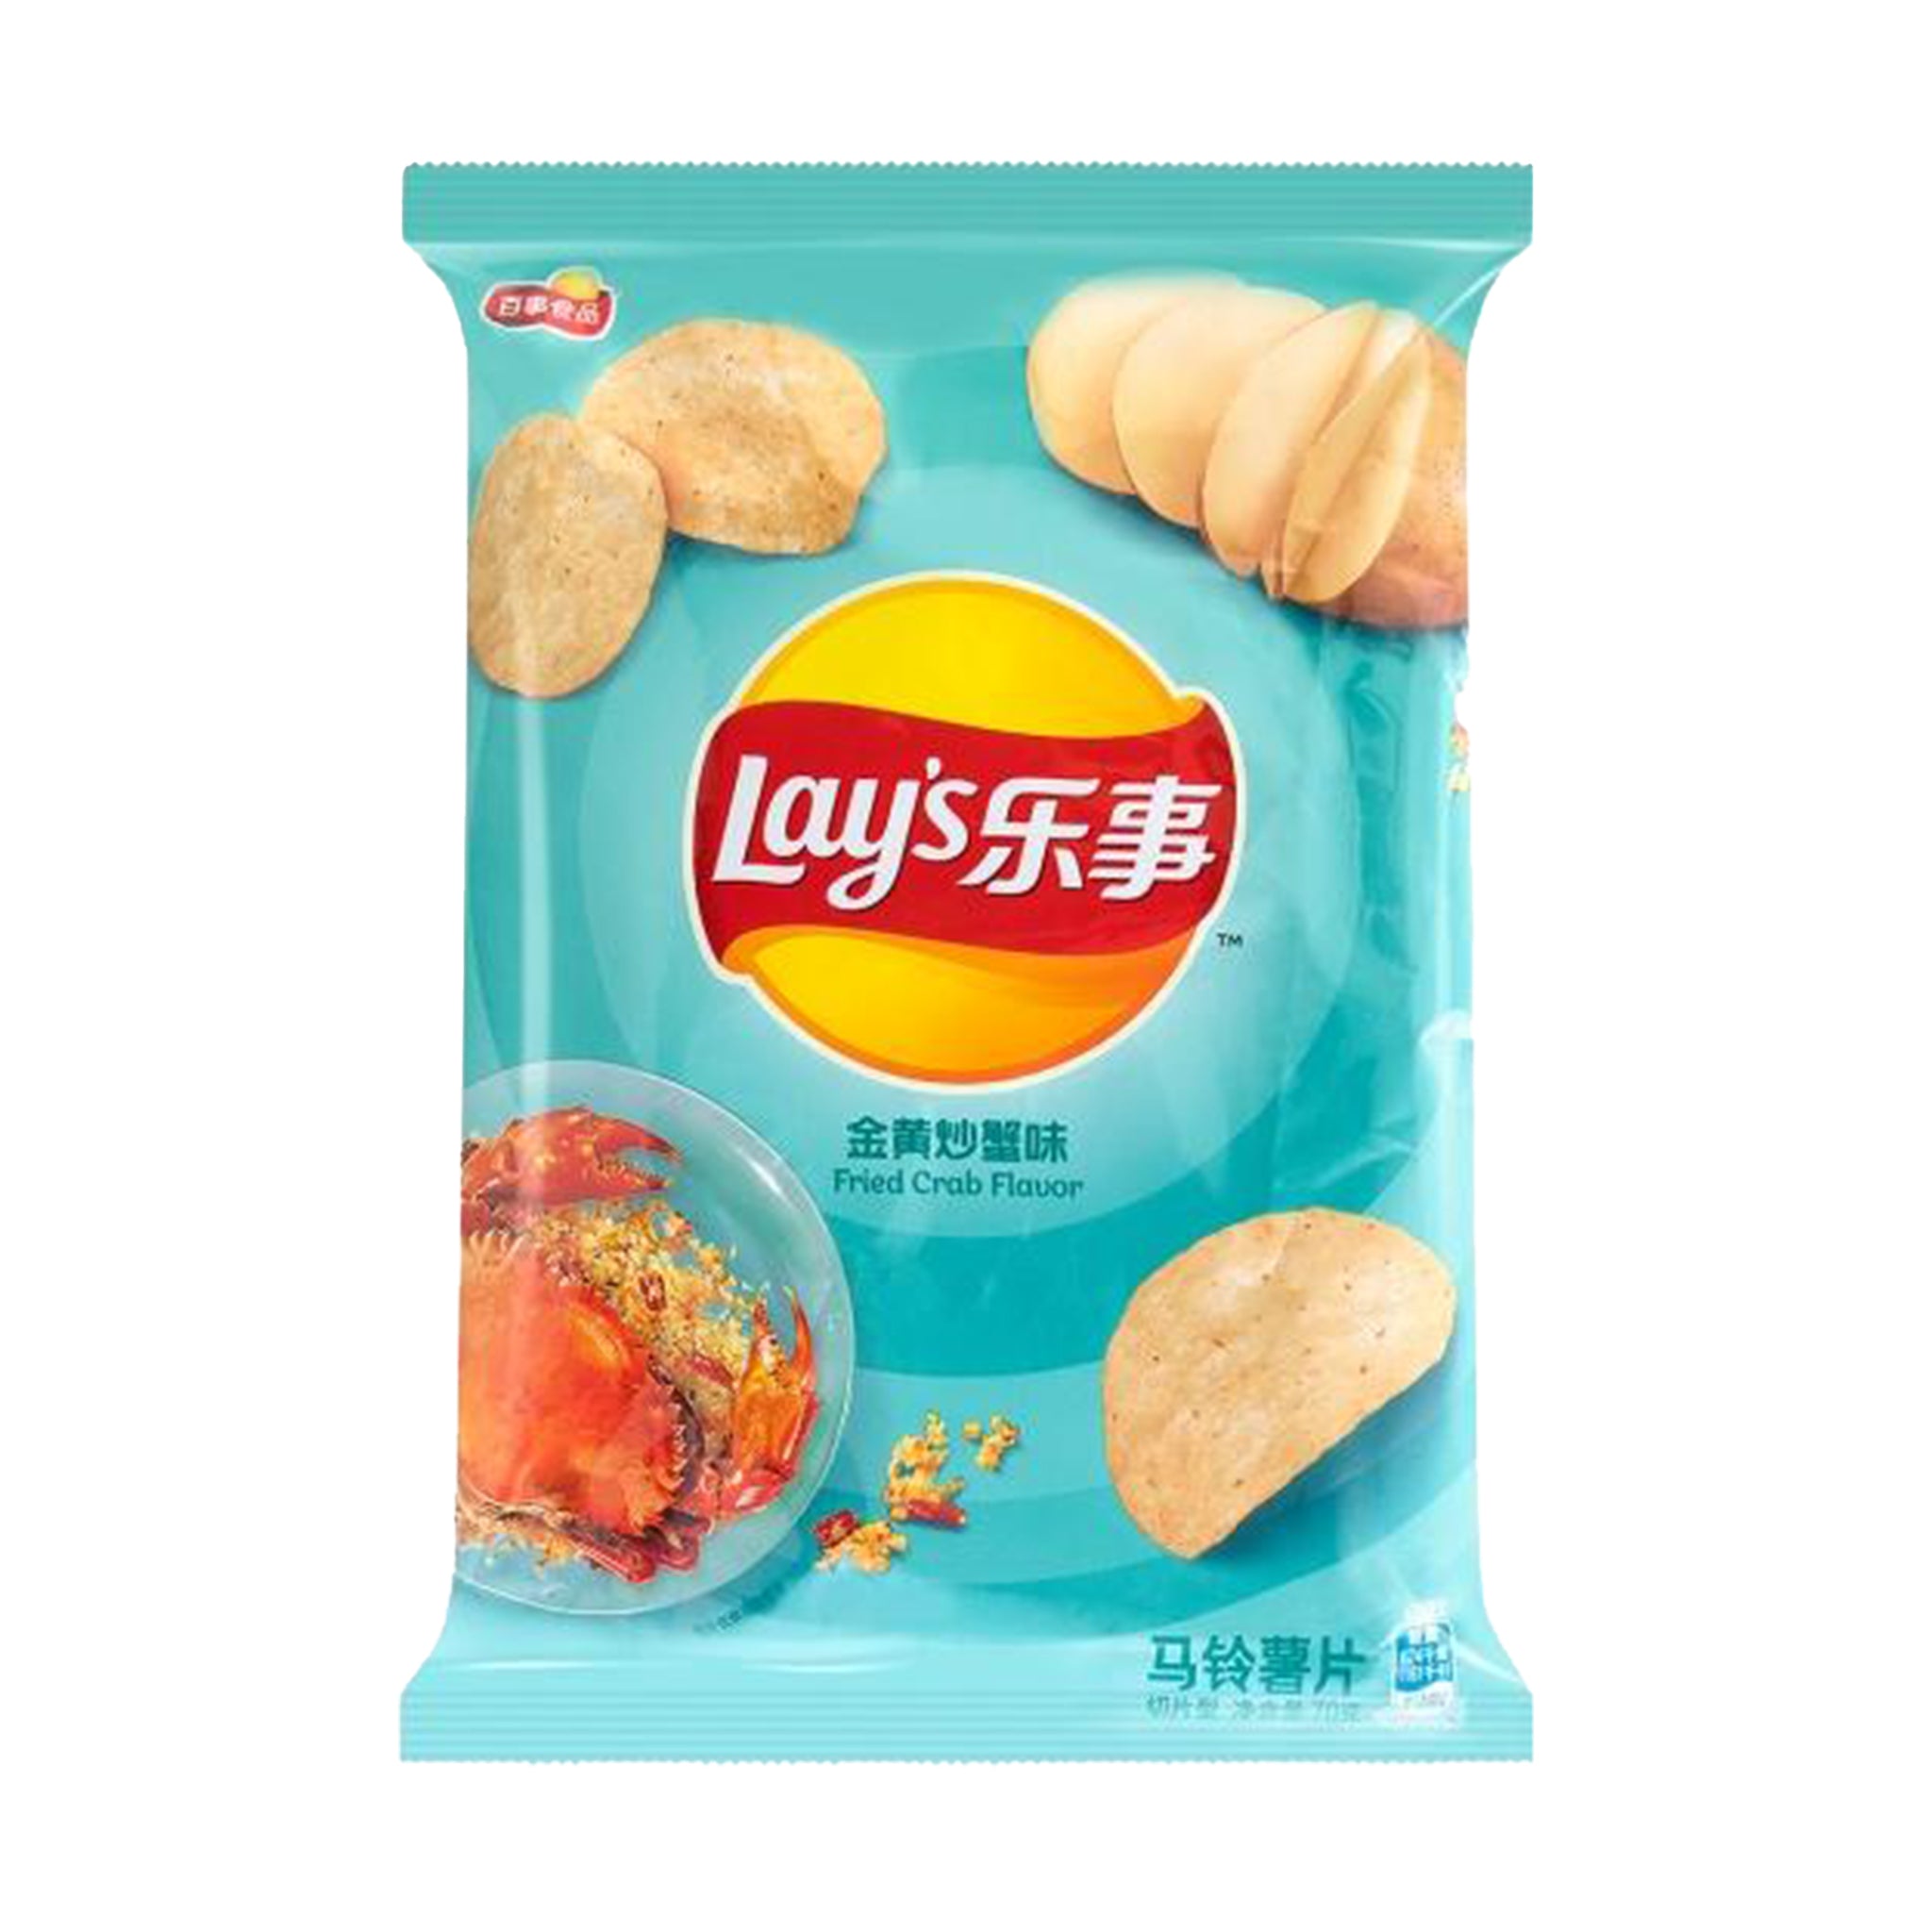 Lay's - Fried Crab Flavor (Asia)